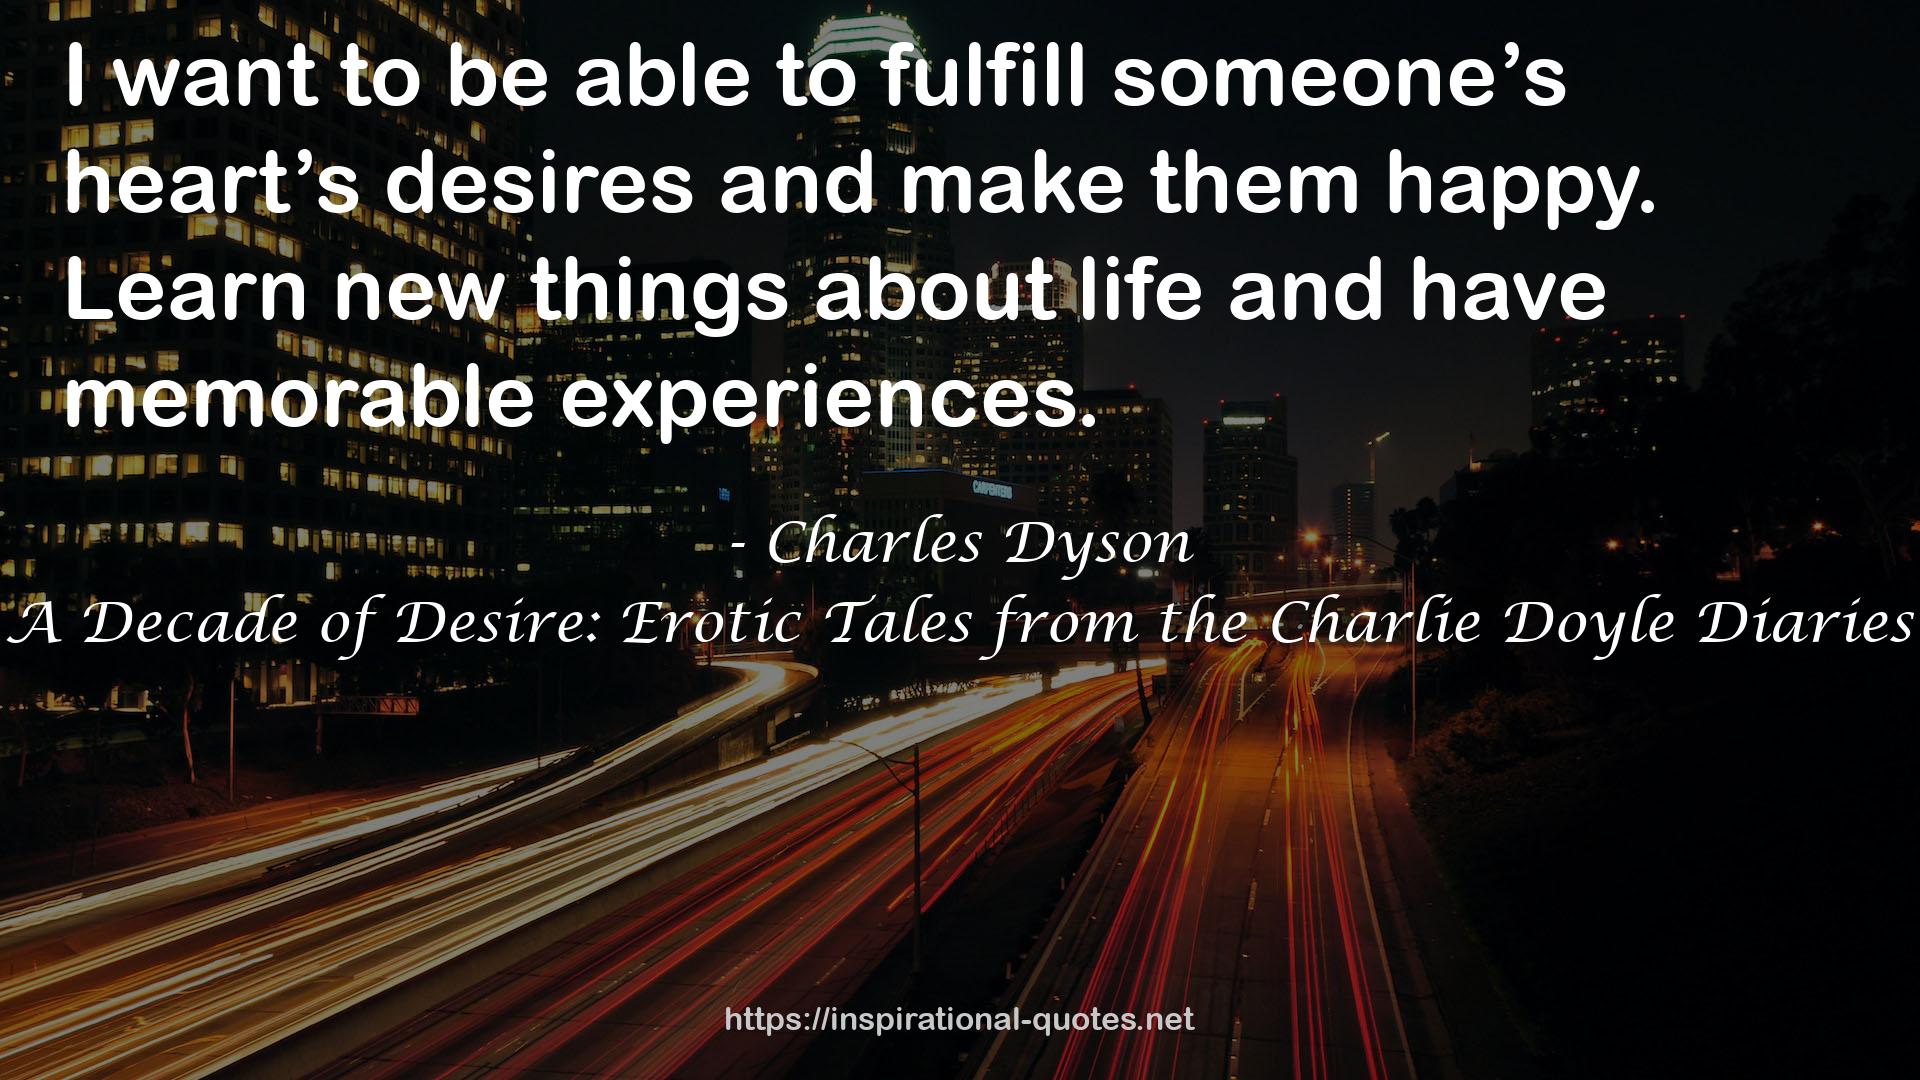 Charles Dyson QUOTES